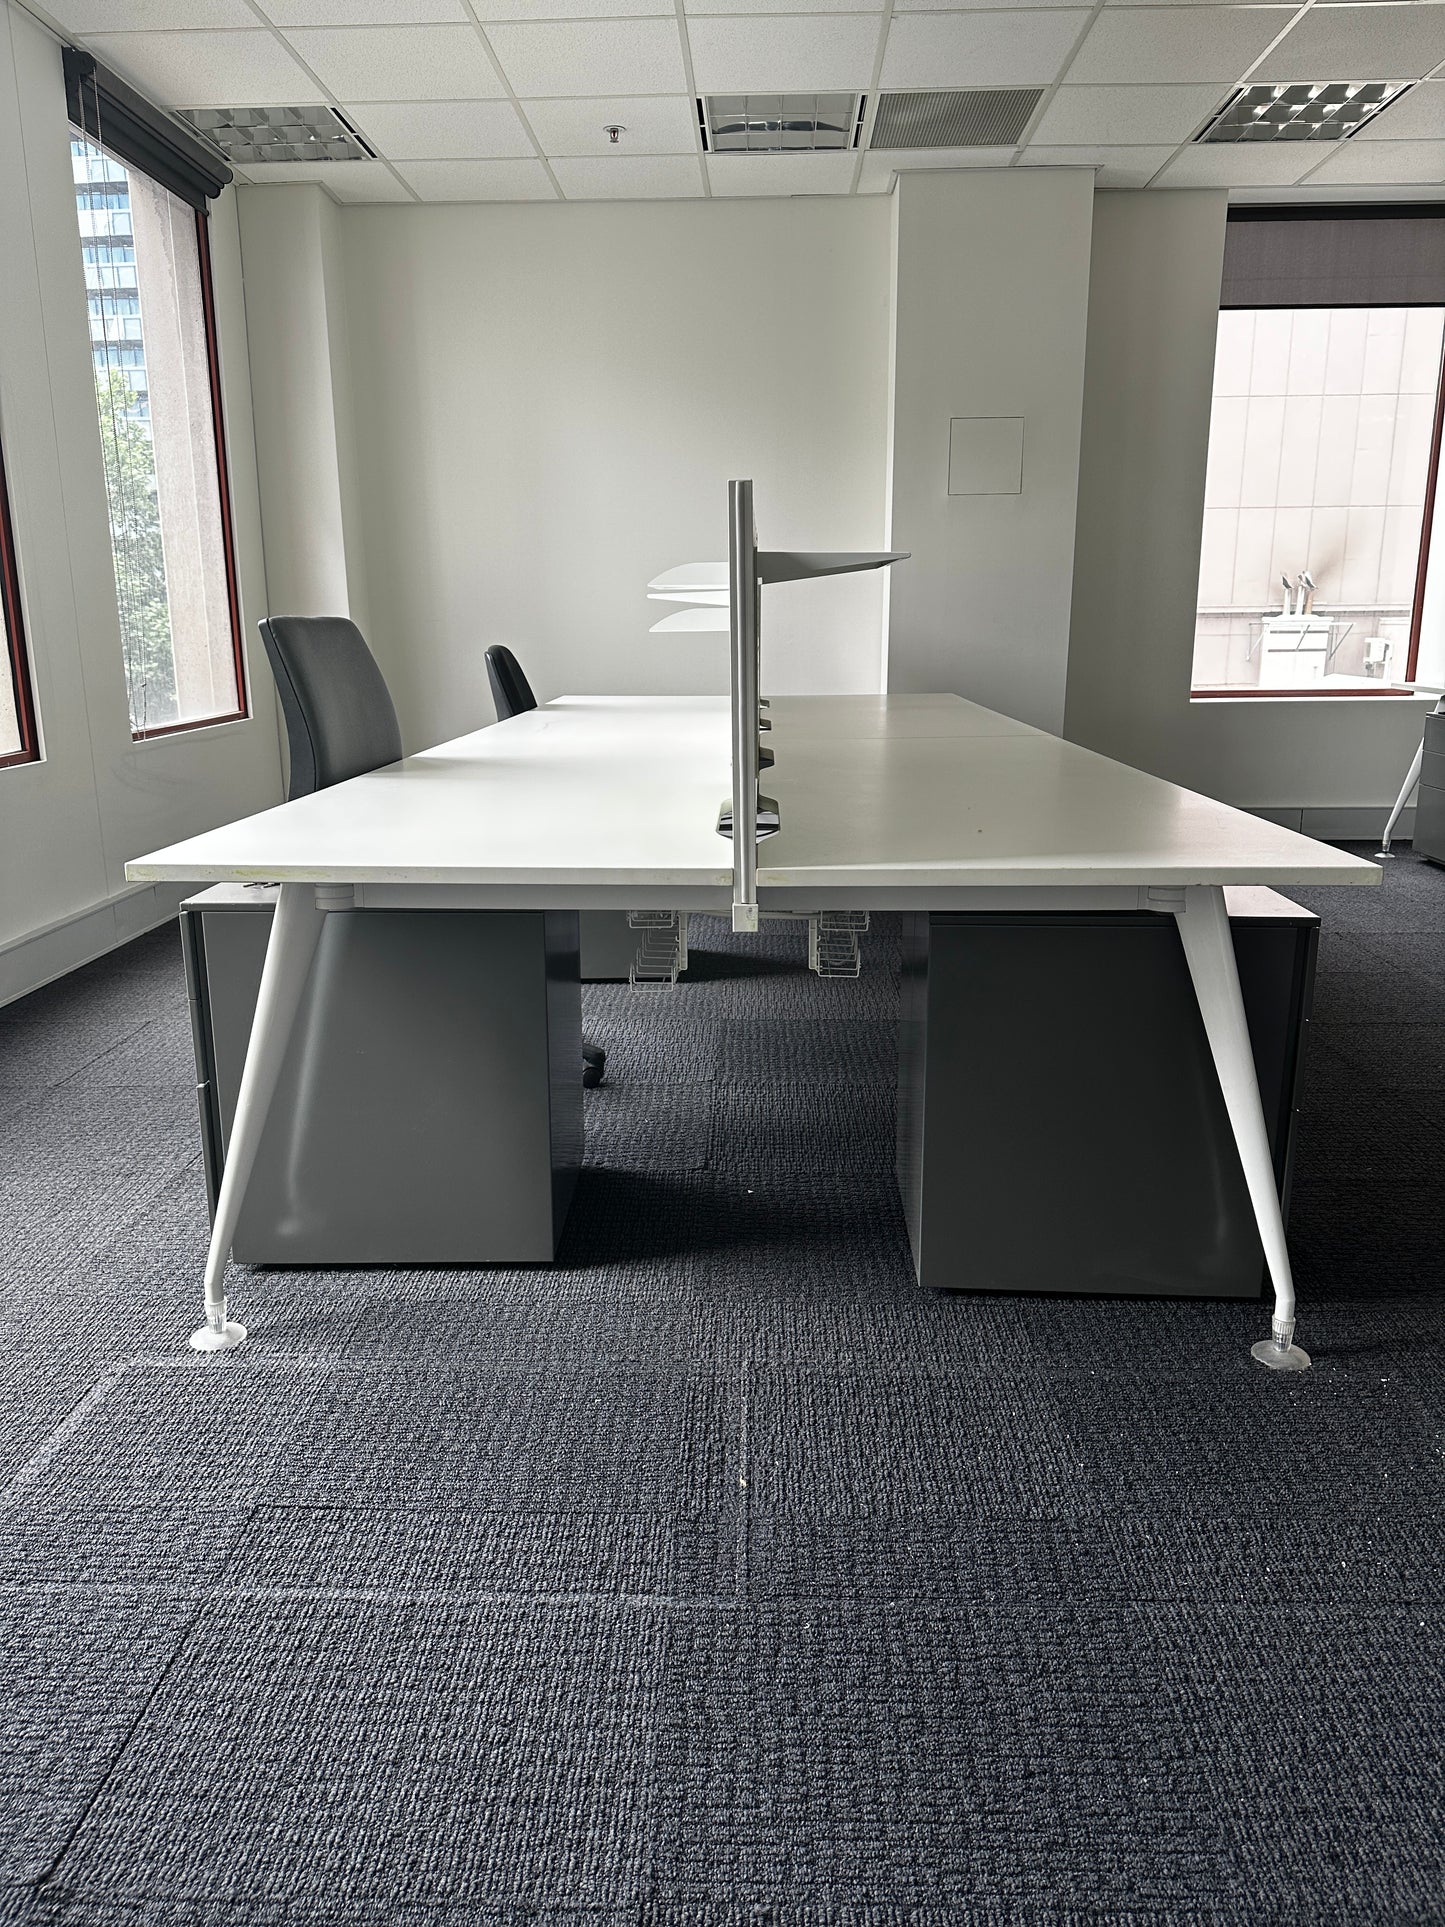 Methis Australia 4 Person Workstation with Green Partitions